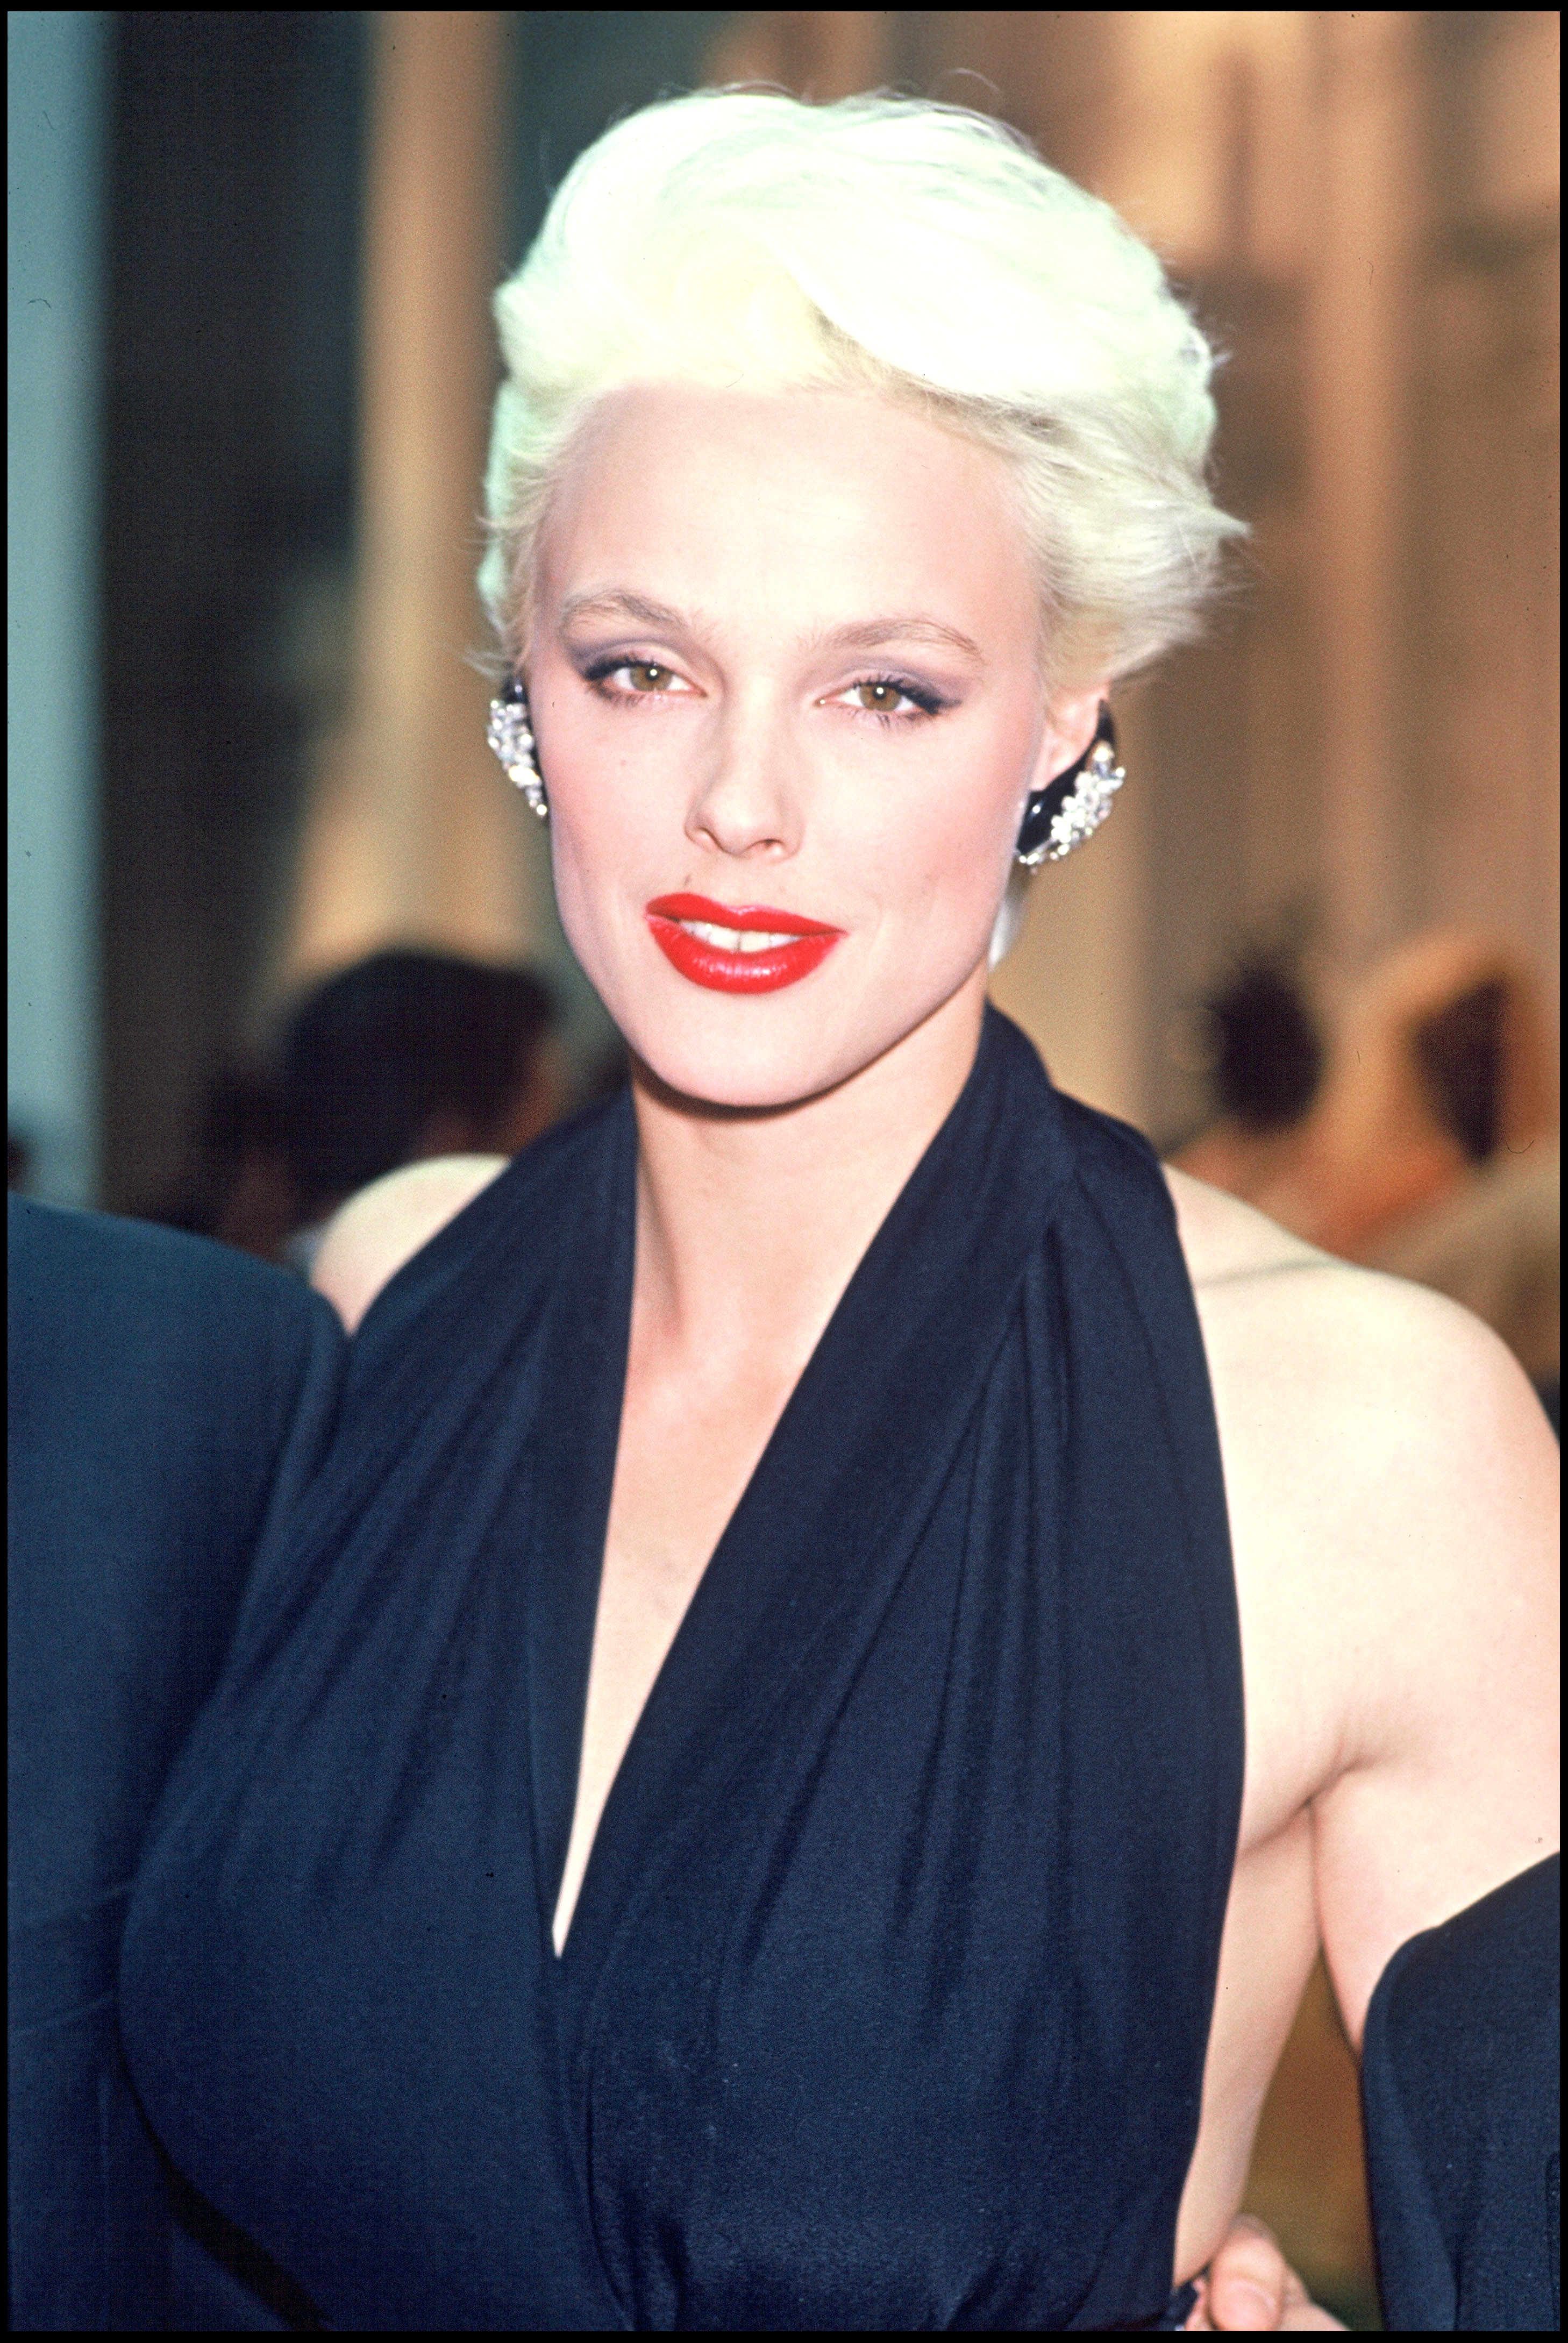 Brigitte Nielsen at the Best Awards ceremony in 1988 | Source: Getty Images